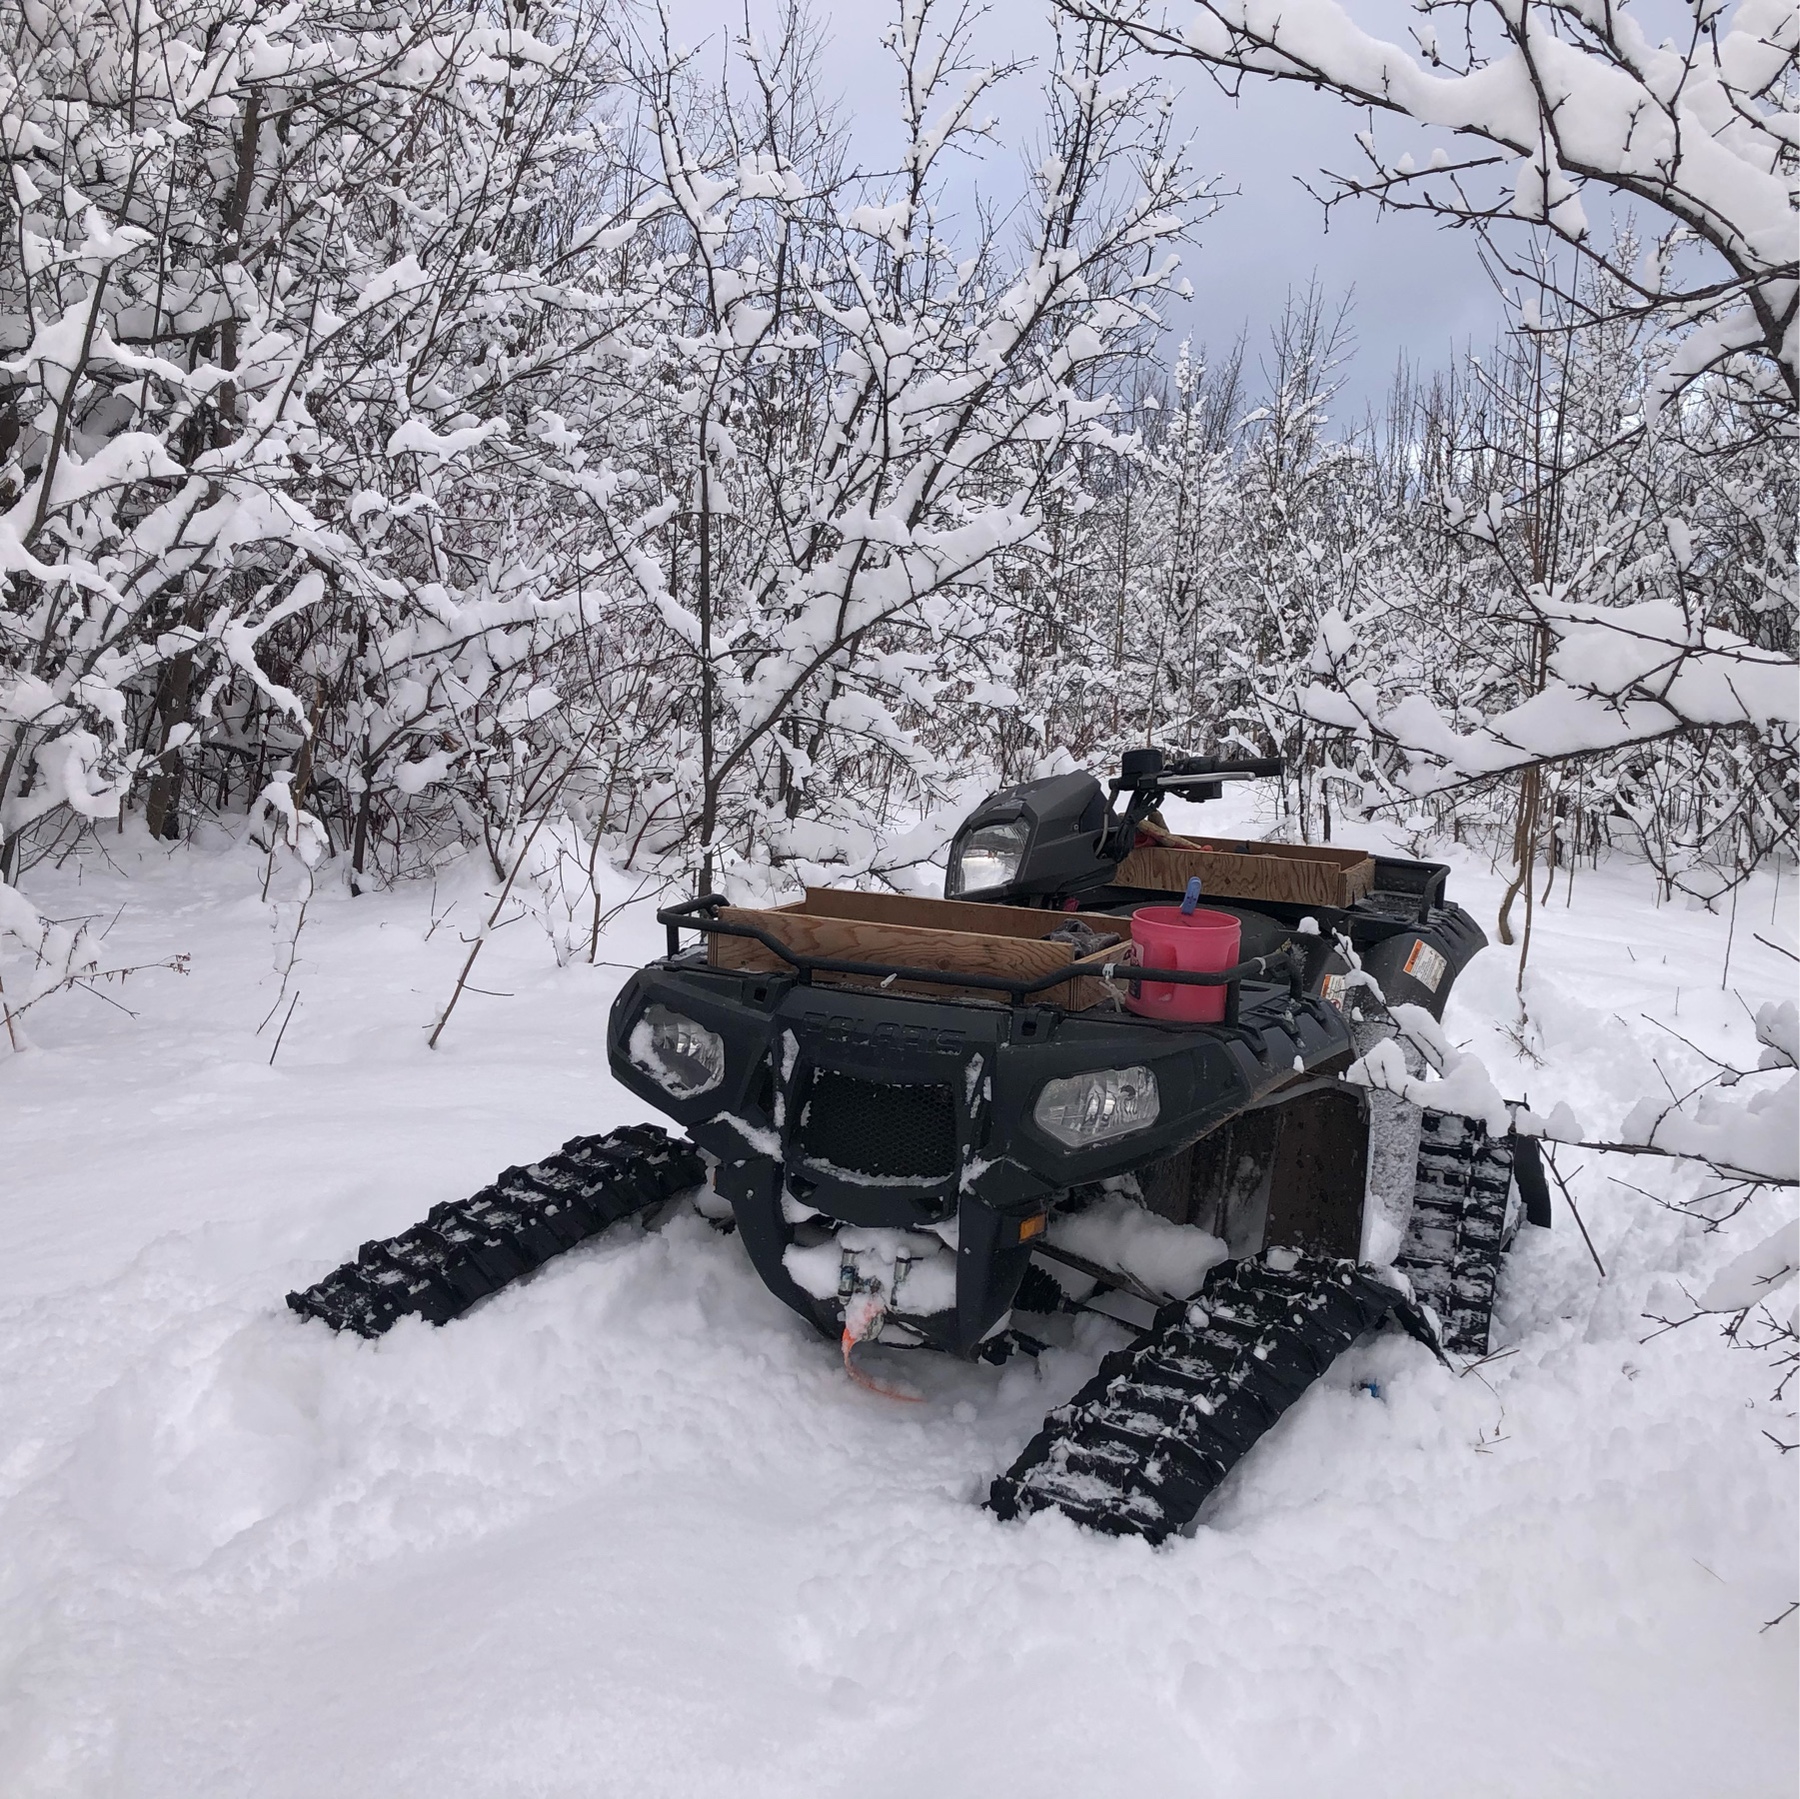 atv sittong in very deep snow. machine has tracks instead of wjeels. snow covers the branches of all the trees around it